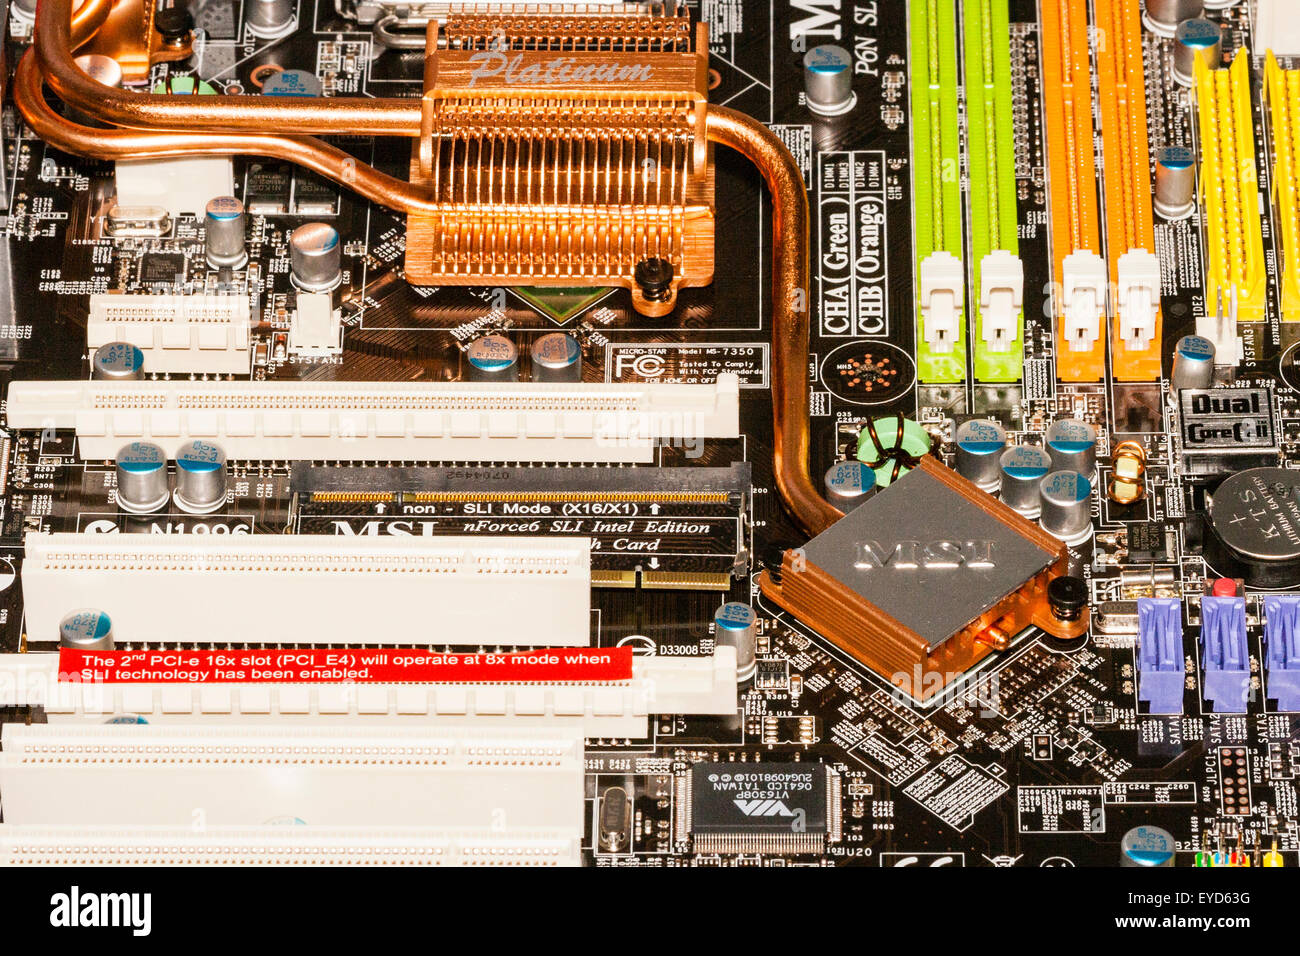 MSI Intel home computer motherboard with large copper coloured 'platinum' heatsink in the middle, and various other electronic components. Stock Photo